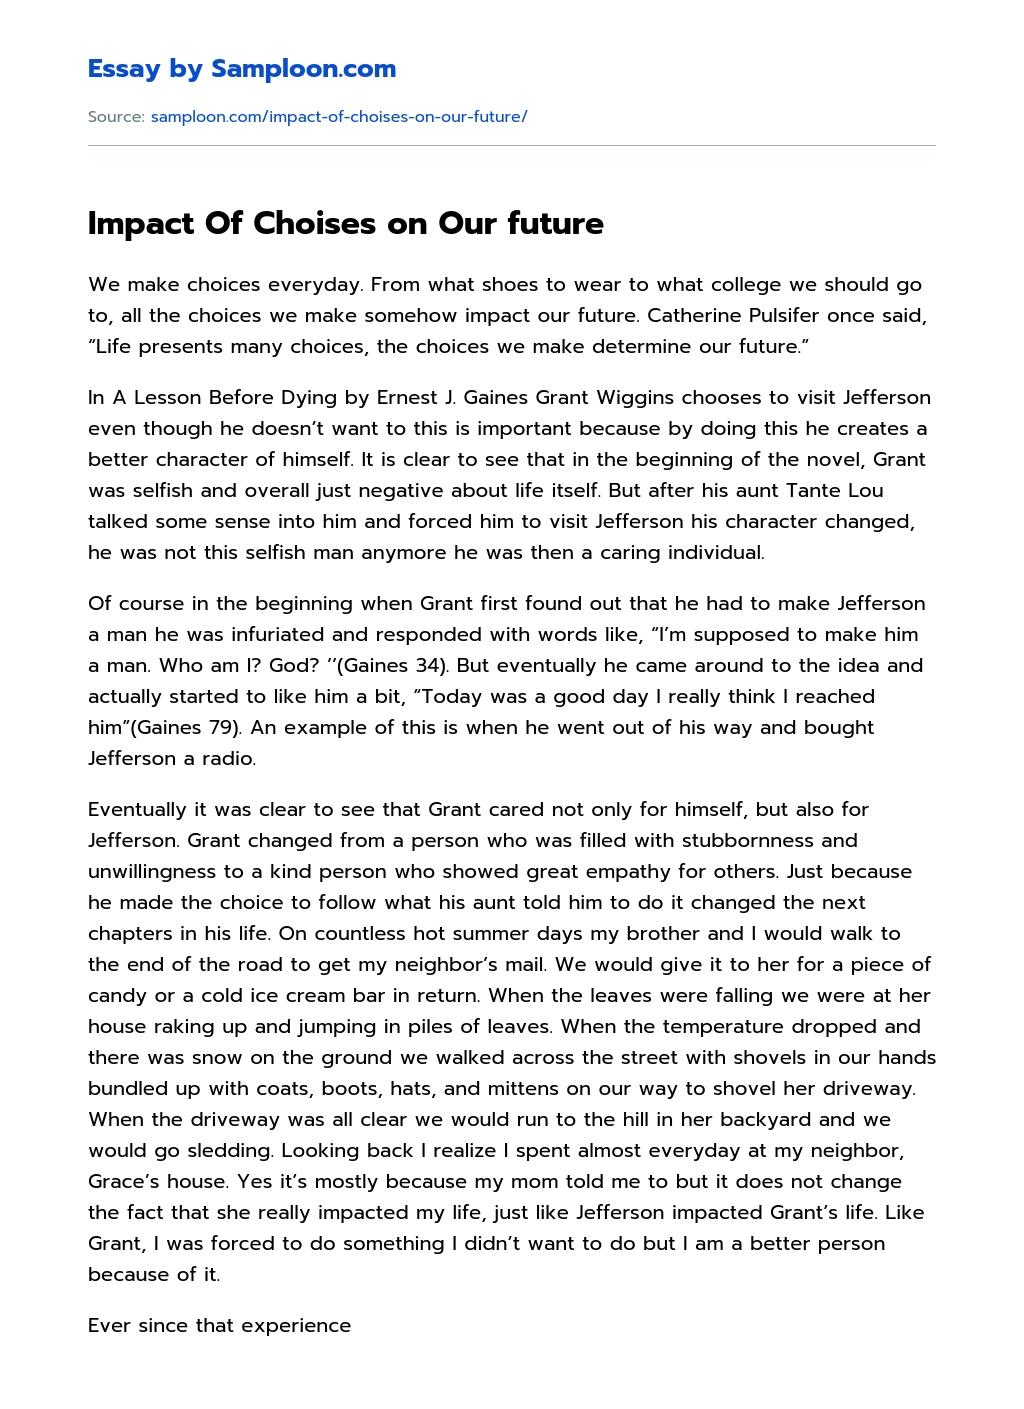 Impact Of Choises on Our future essay